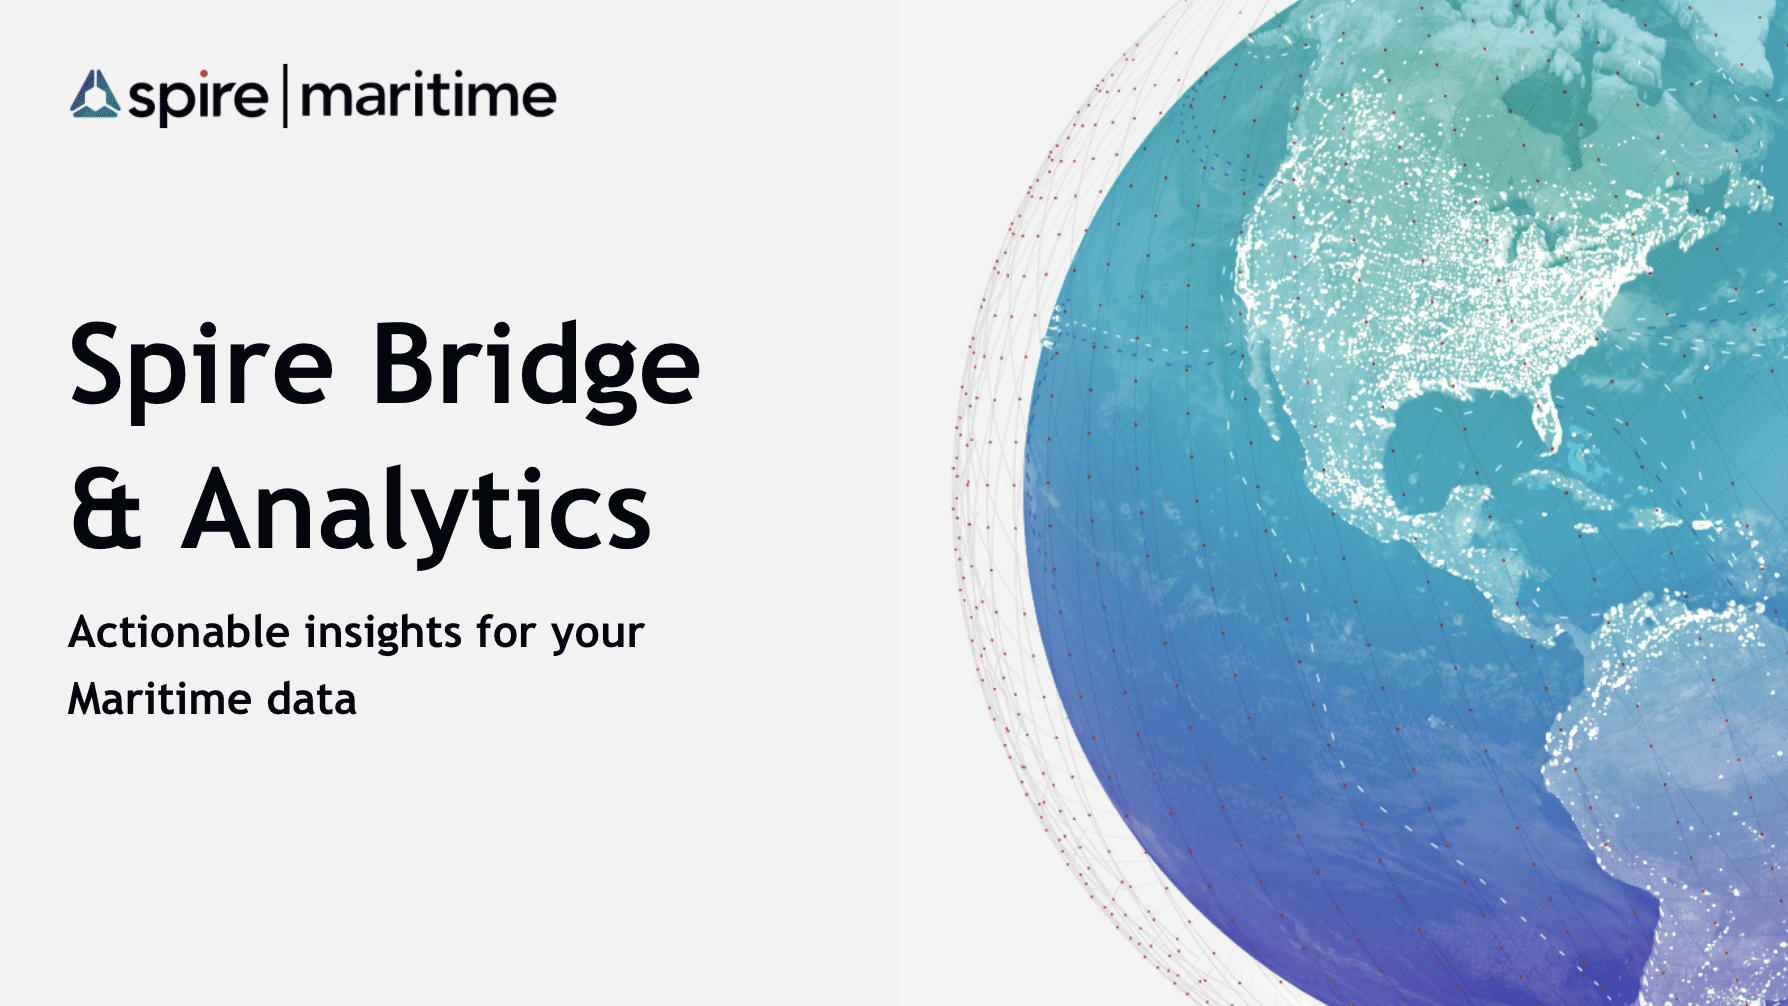 Spire Maritime Announces Expansion of Data Analytics with New Platform and Features